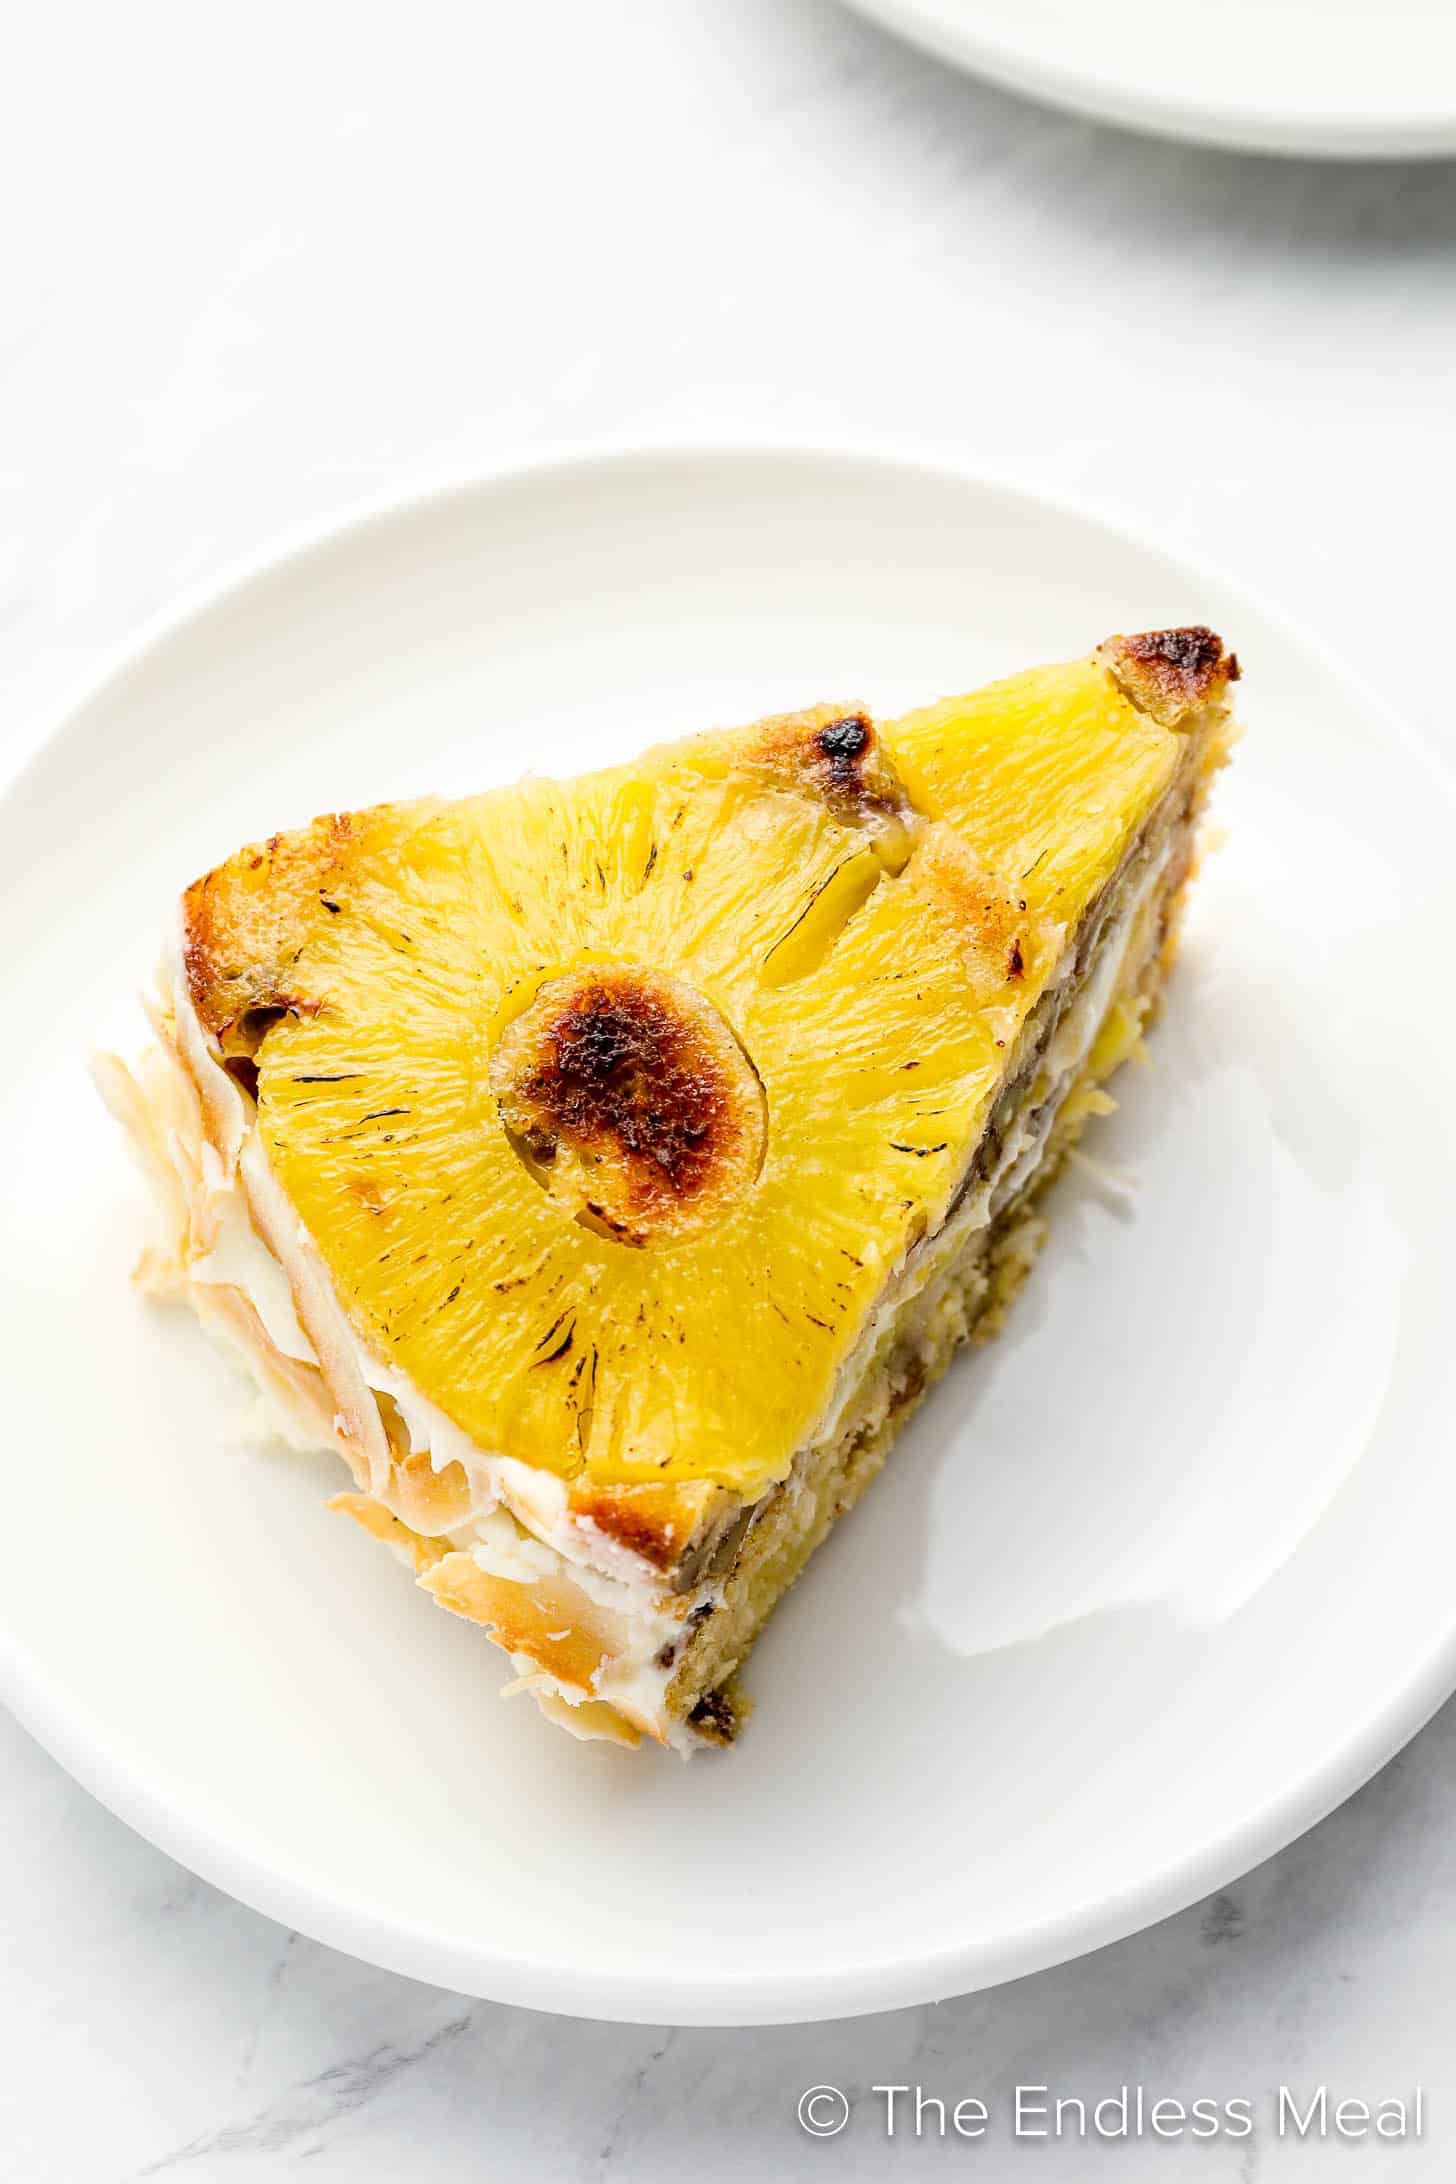 A slice of Pineapple Coconut Upside Down Cake on a plate